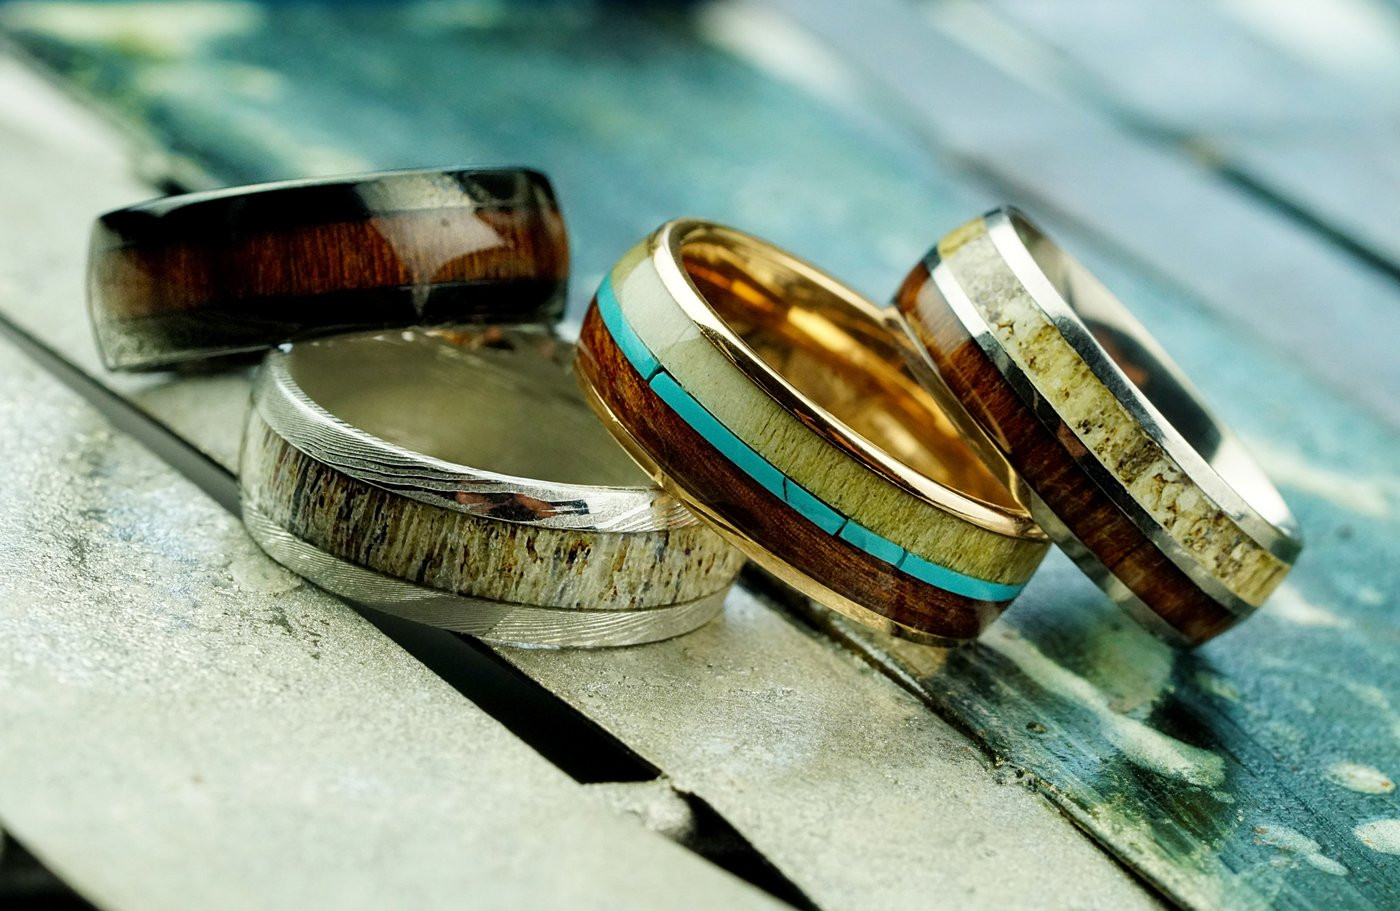 Manly Wedding Bands
 Unique Mens Wedding Bands & Weddings Rings Manly Bands